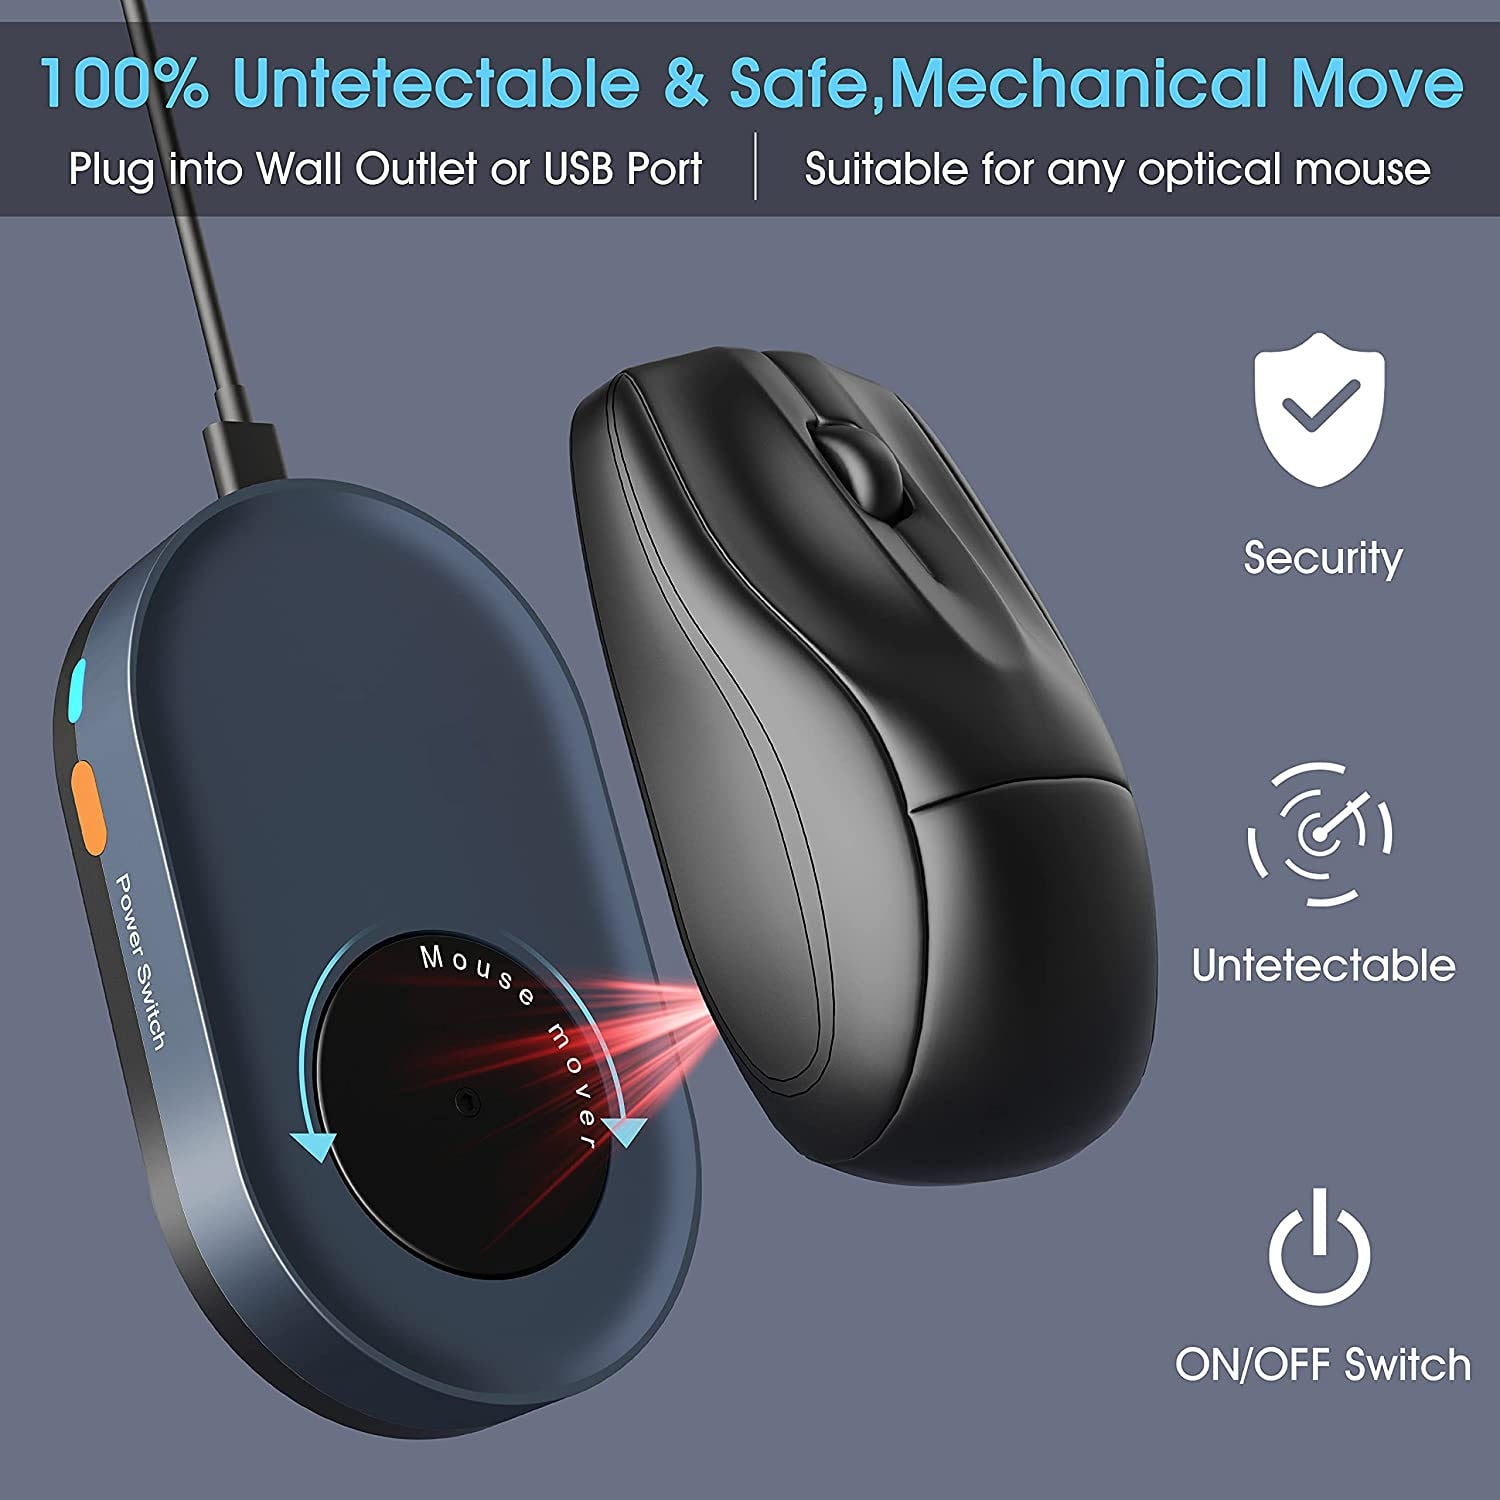 Mouse Mover Jiggler with ON/Off Switch and USB Port Drive-Free,Automatically Mouse Movement,Prevent Computer Laptop Lockdown